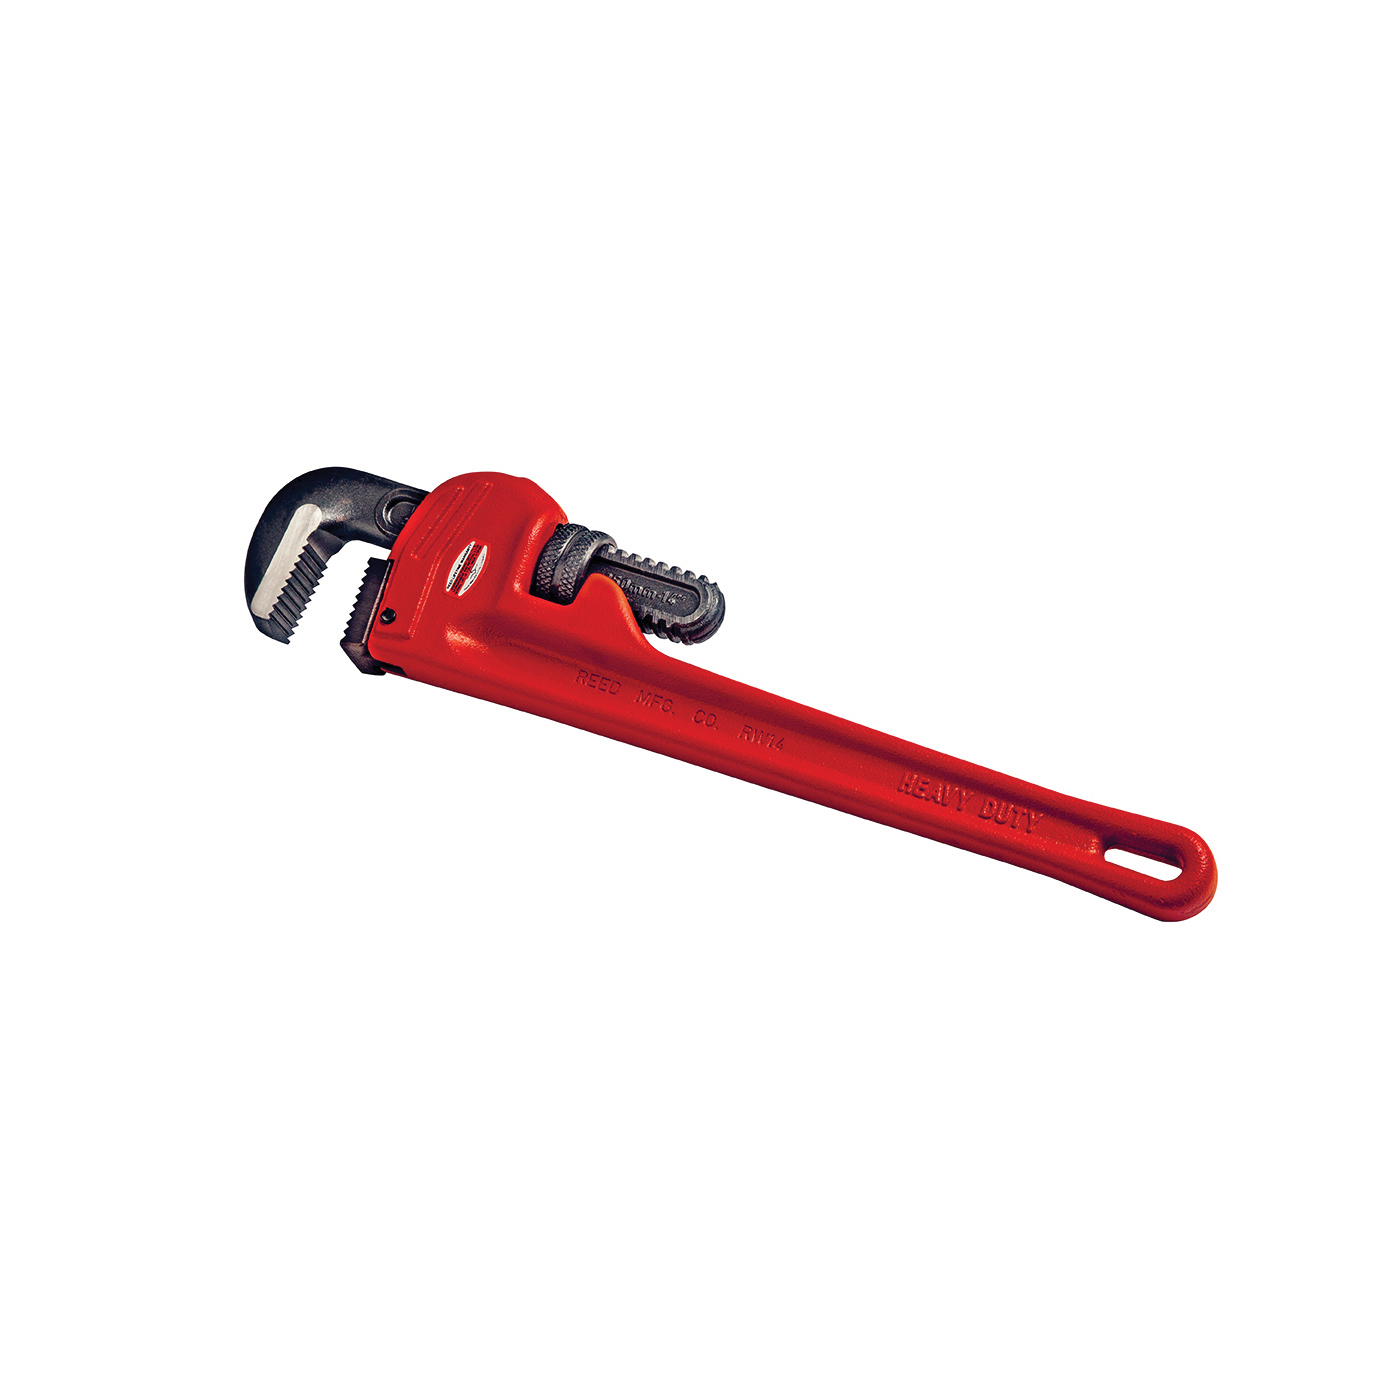 Reed 02140 Heavy Duty Straight Pipe Wrench, 1/8 to 2 in Pipe, 12 in OAL, Heel Jaw, Ductile Iron Handle